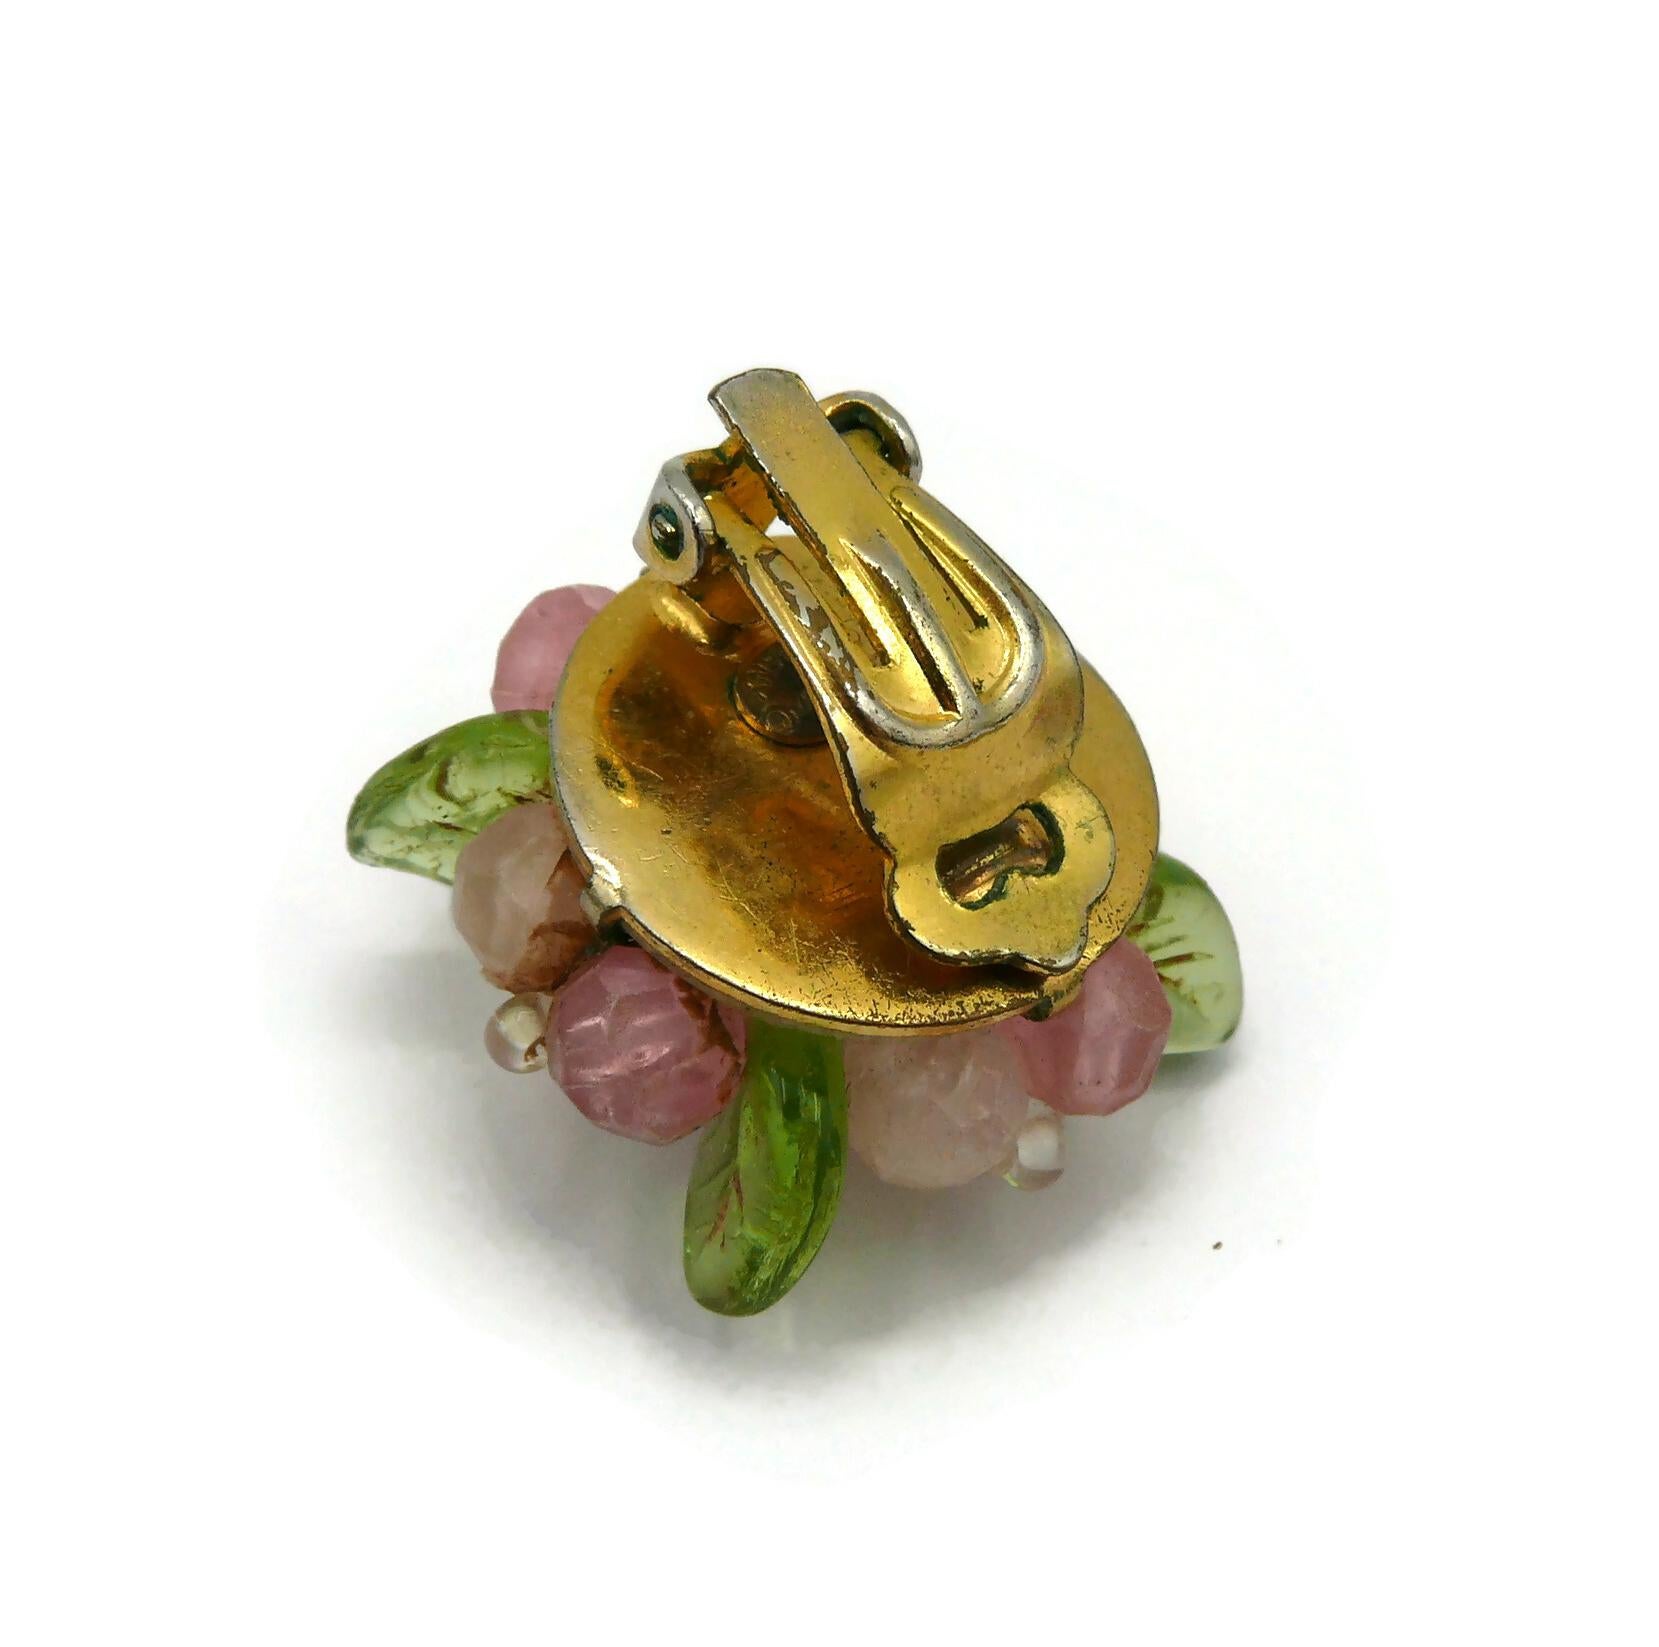 CHRISTIAN DIOR Vintage Floral Clip-On Earrings, 1967 For Sale 4